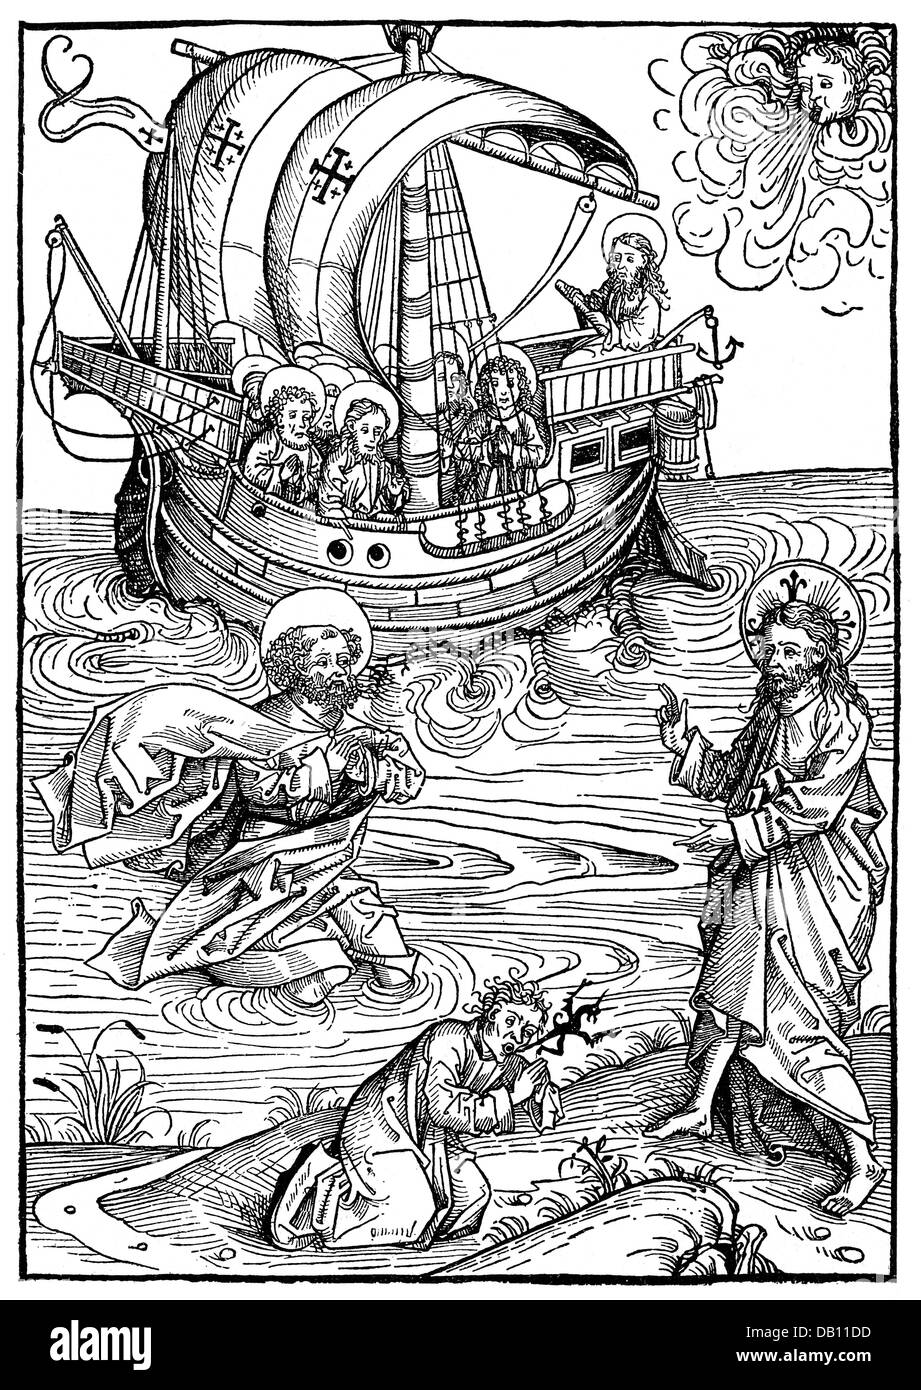 transport / transportation,navigation,Middle Ages,Hanse,Hanseatic cog,scene with Jesus and St. Peter in foreground,woodcut,15th century,15th century,graphic,graphics,medieval,mediaeval,sailing ship,sailing ships,cog,cogs,trading company,trading companies,general partnership,half length,religion,religions,Christianity,biblical scene,biblical scenes,biblical story,biblical stories,disciple,follower,disciples,followers,Jesus Christ,blessing,bless,Peter,water,sea,seas,possessed,demon,daemon,demons,daemons,transport,trans,Additional-Rights-Clearences-Not Available Stock Photo